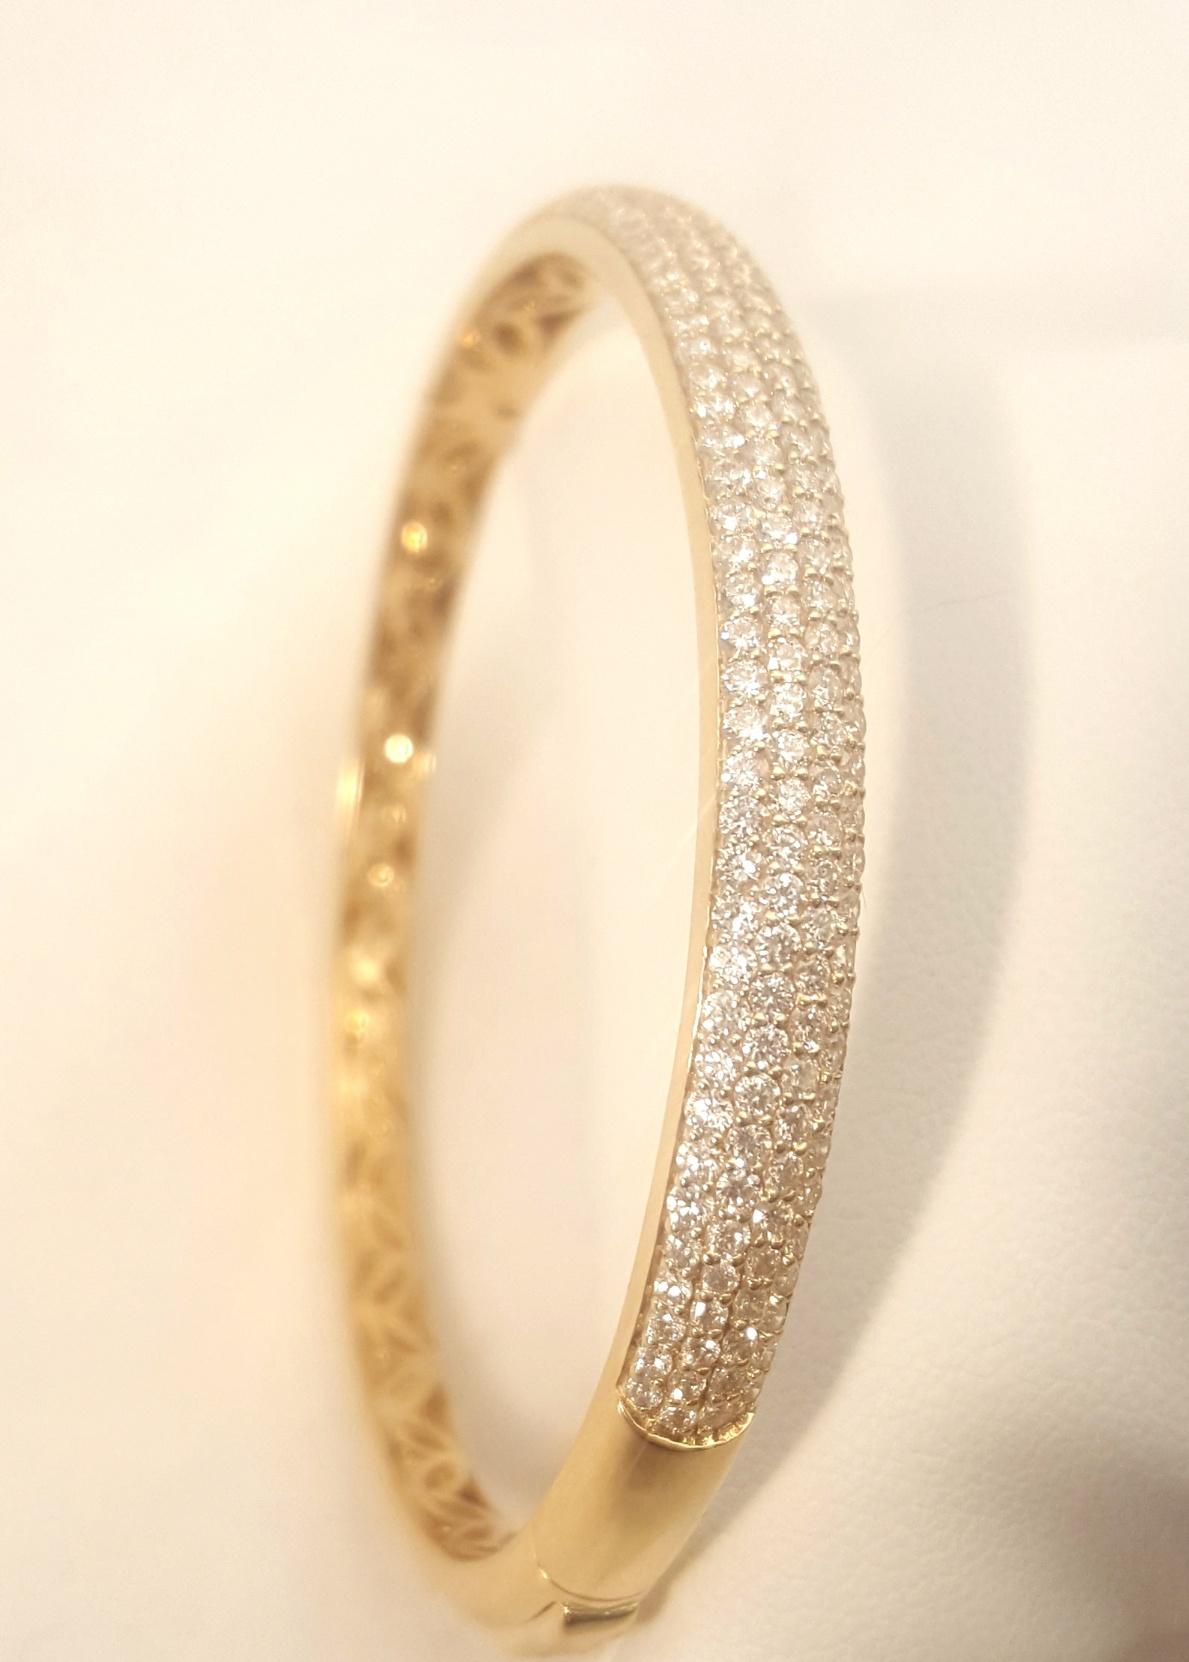 Brand new! Crafted in 18 karat yellow gold, this tapered bangle boasts a top section containing 172 round white diamonds, pave set, with a combined total weight of 2.32 carats.  The sparkle is eye popping!  A double 'click' hidden clasp assures